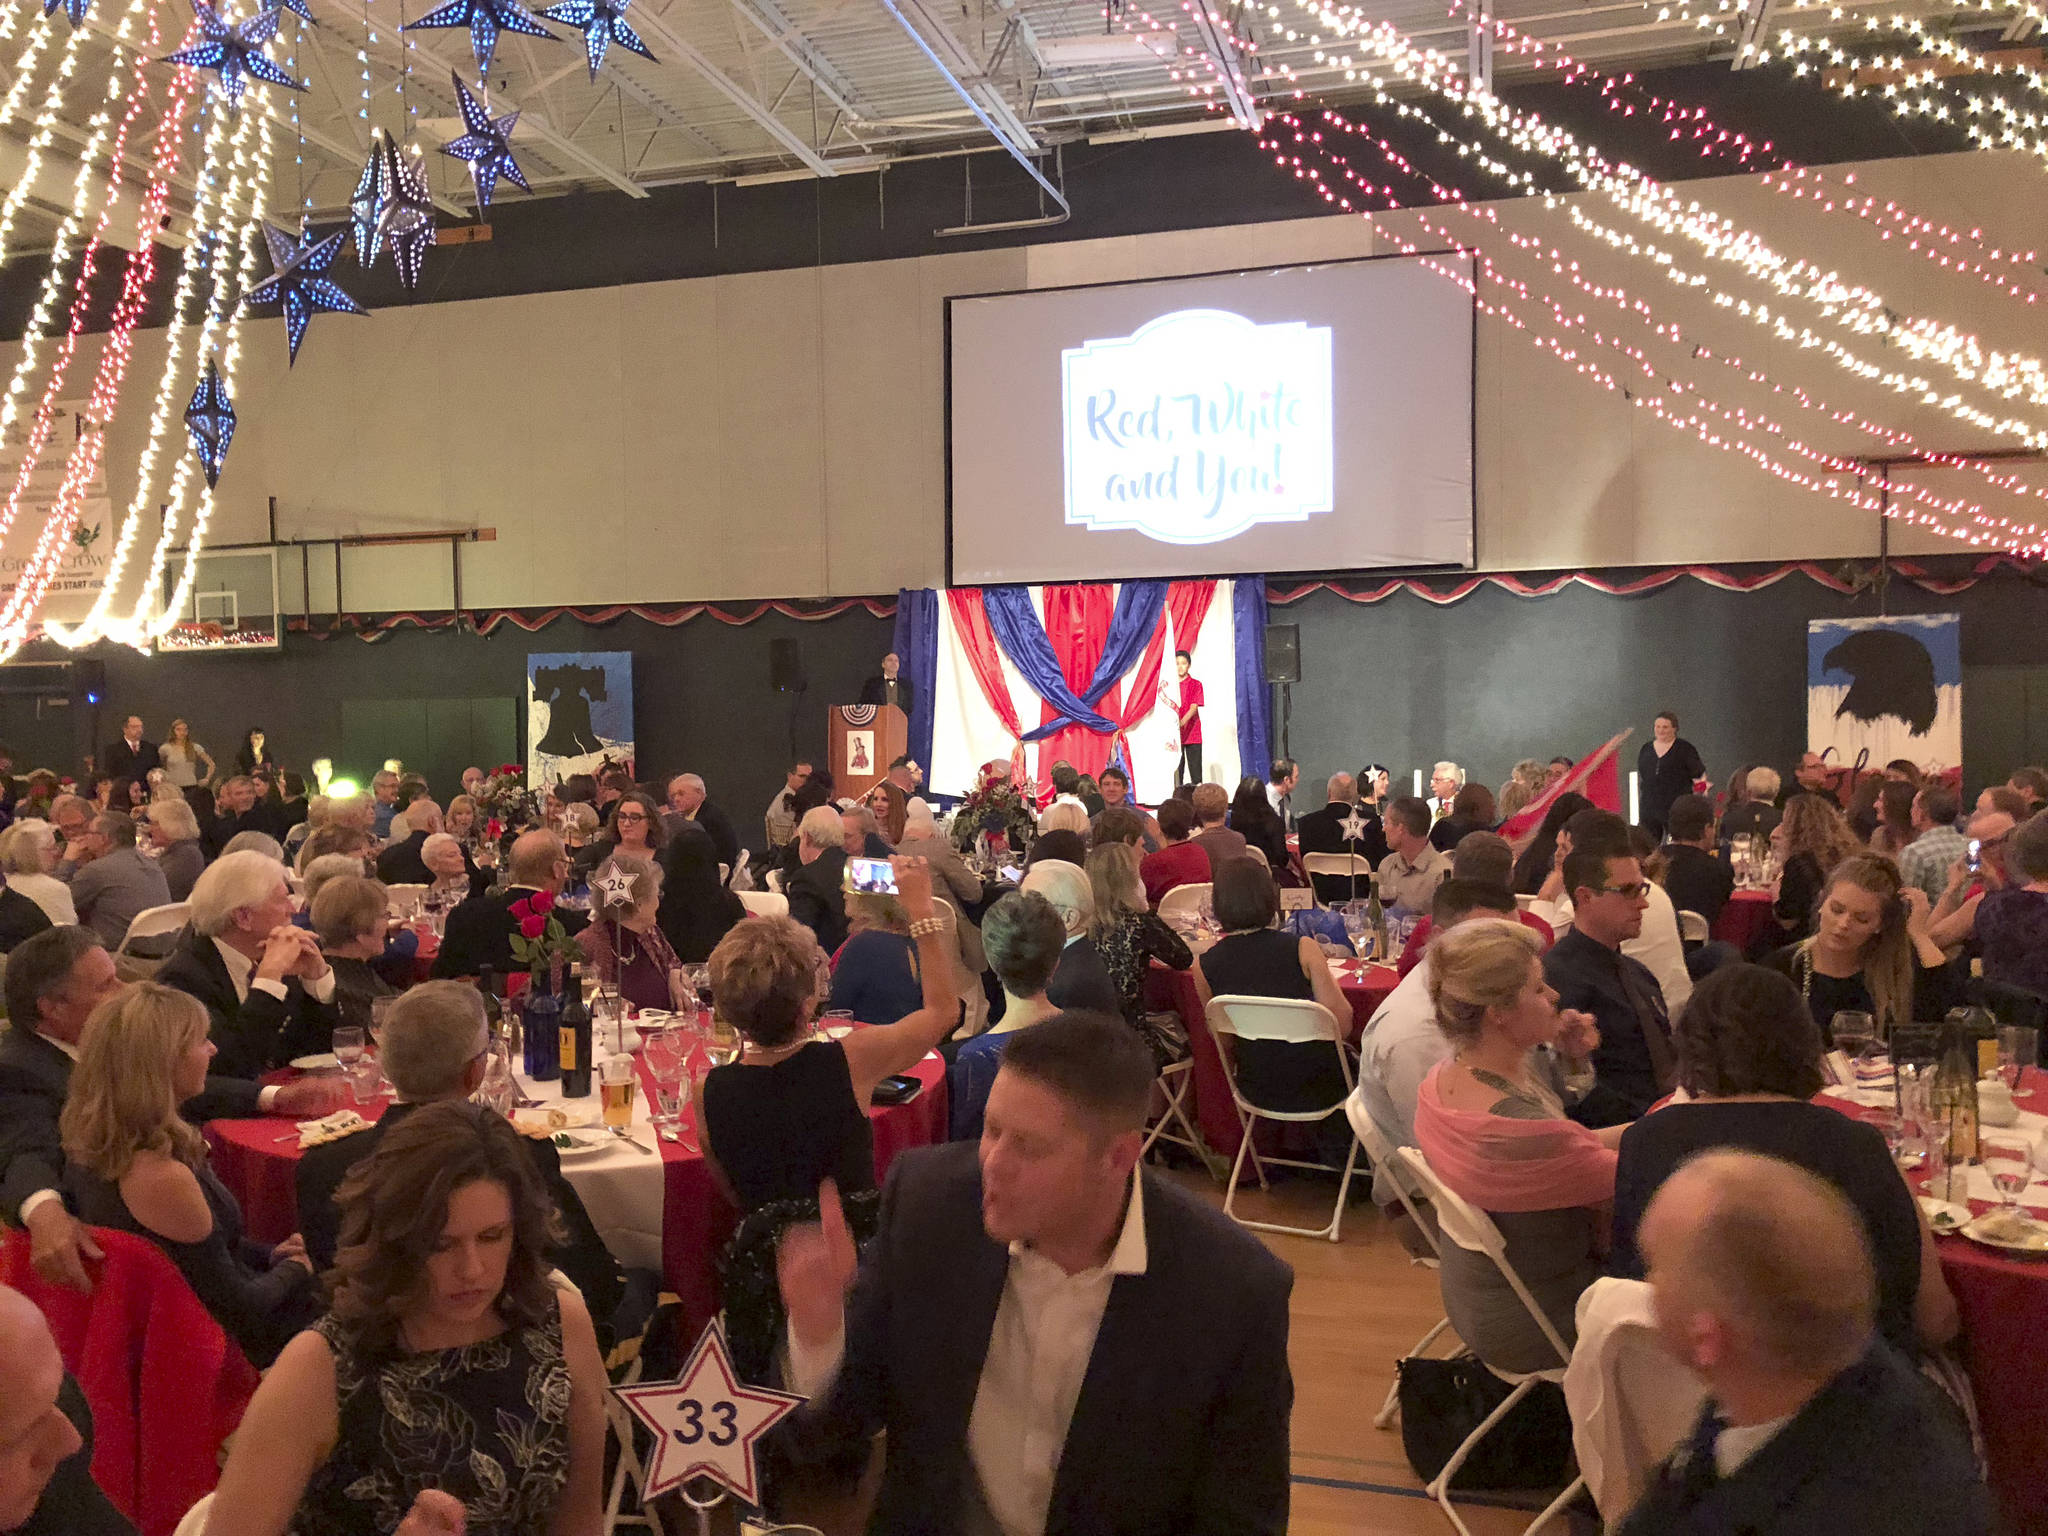 About 400 people attended the Boys & Girls Clubs of the Olympic Peninsula’s 29th annual auction on Nov. 11. Organizers and members of the club presented a tasteful patriotic program for Veterans Day. Submitted photo